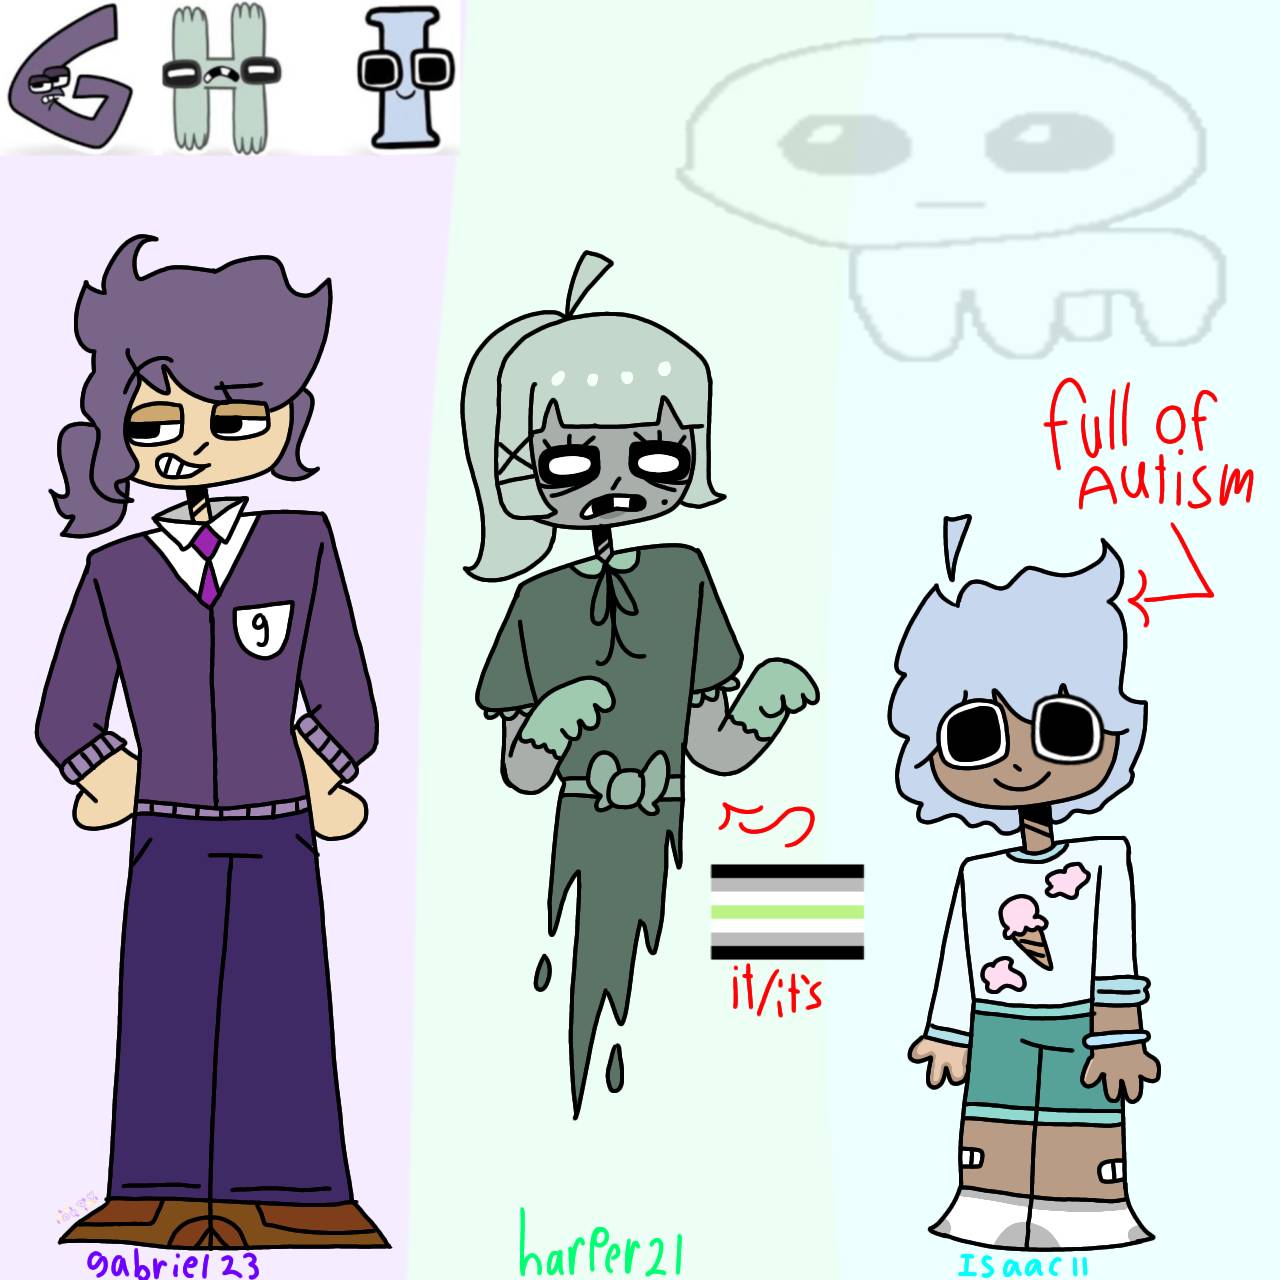 Alphabet lore humans A B and C by goodgirl8593 on DeviantArt